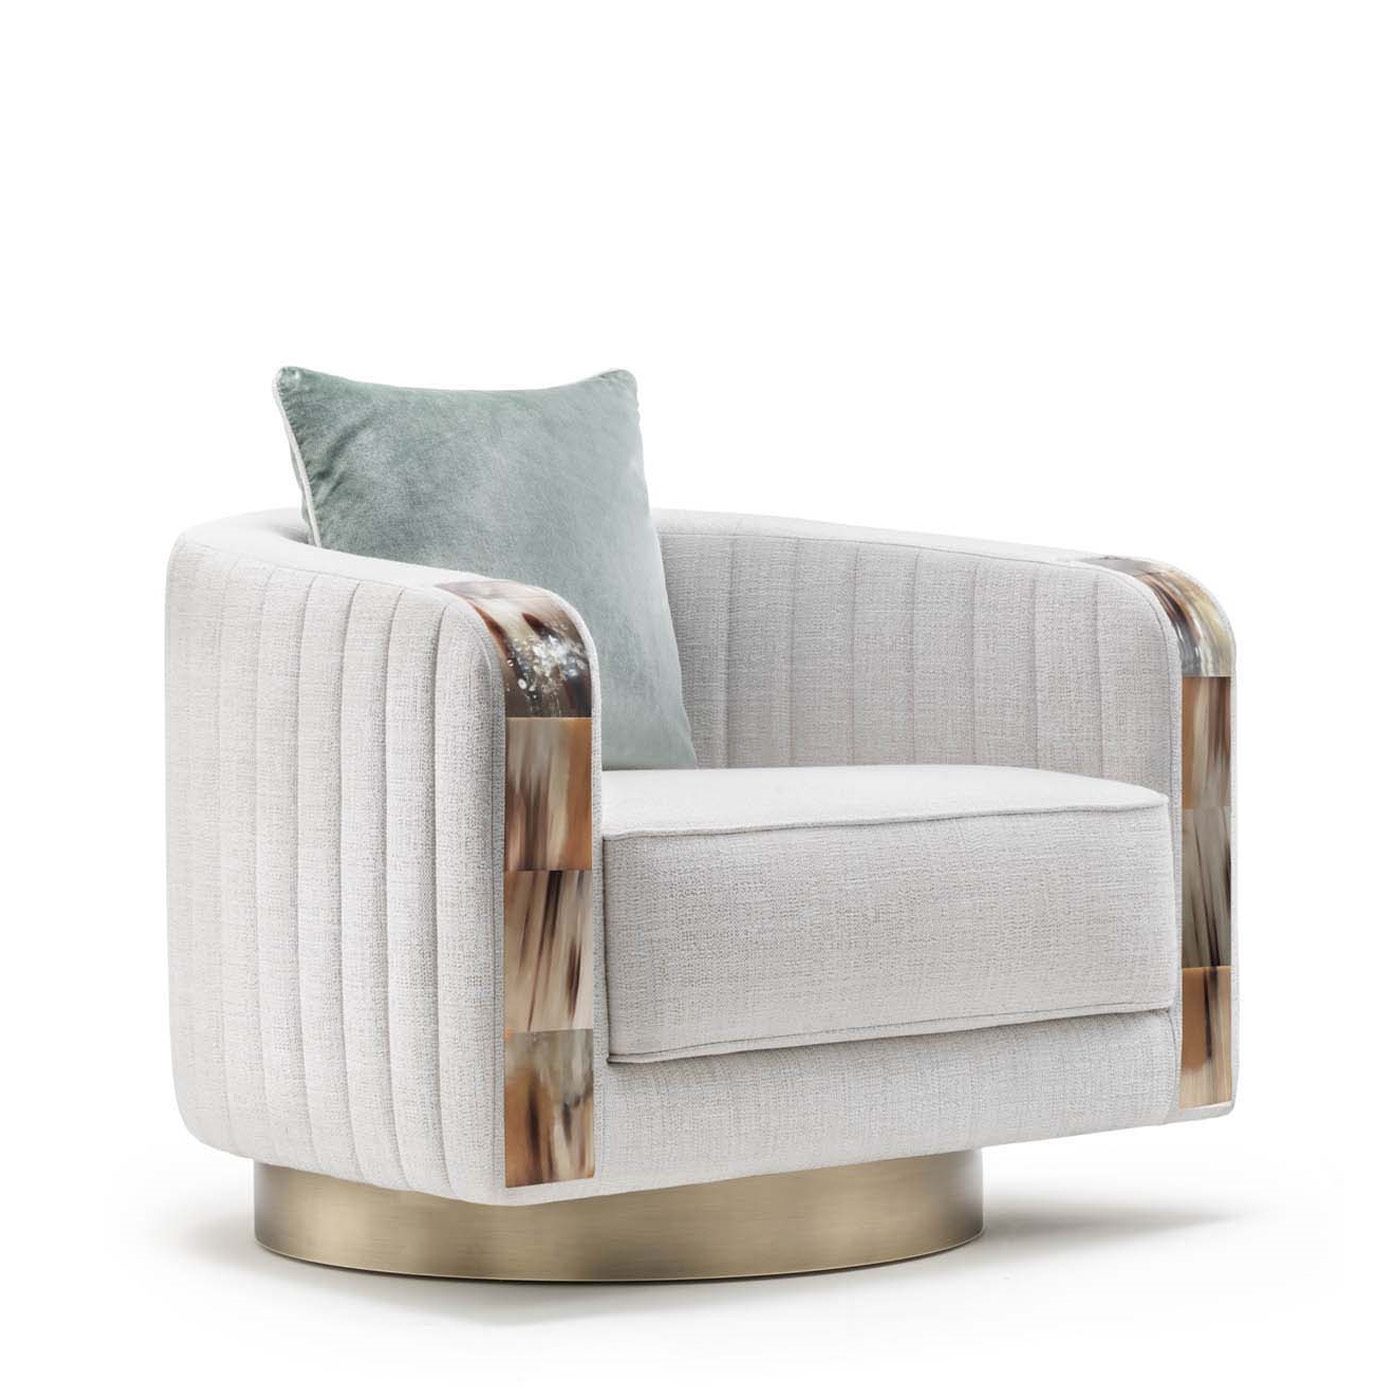 Sofas and seats - Afrodite armchair with horn armrests mod. 7044B white - Arcahorn